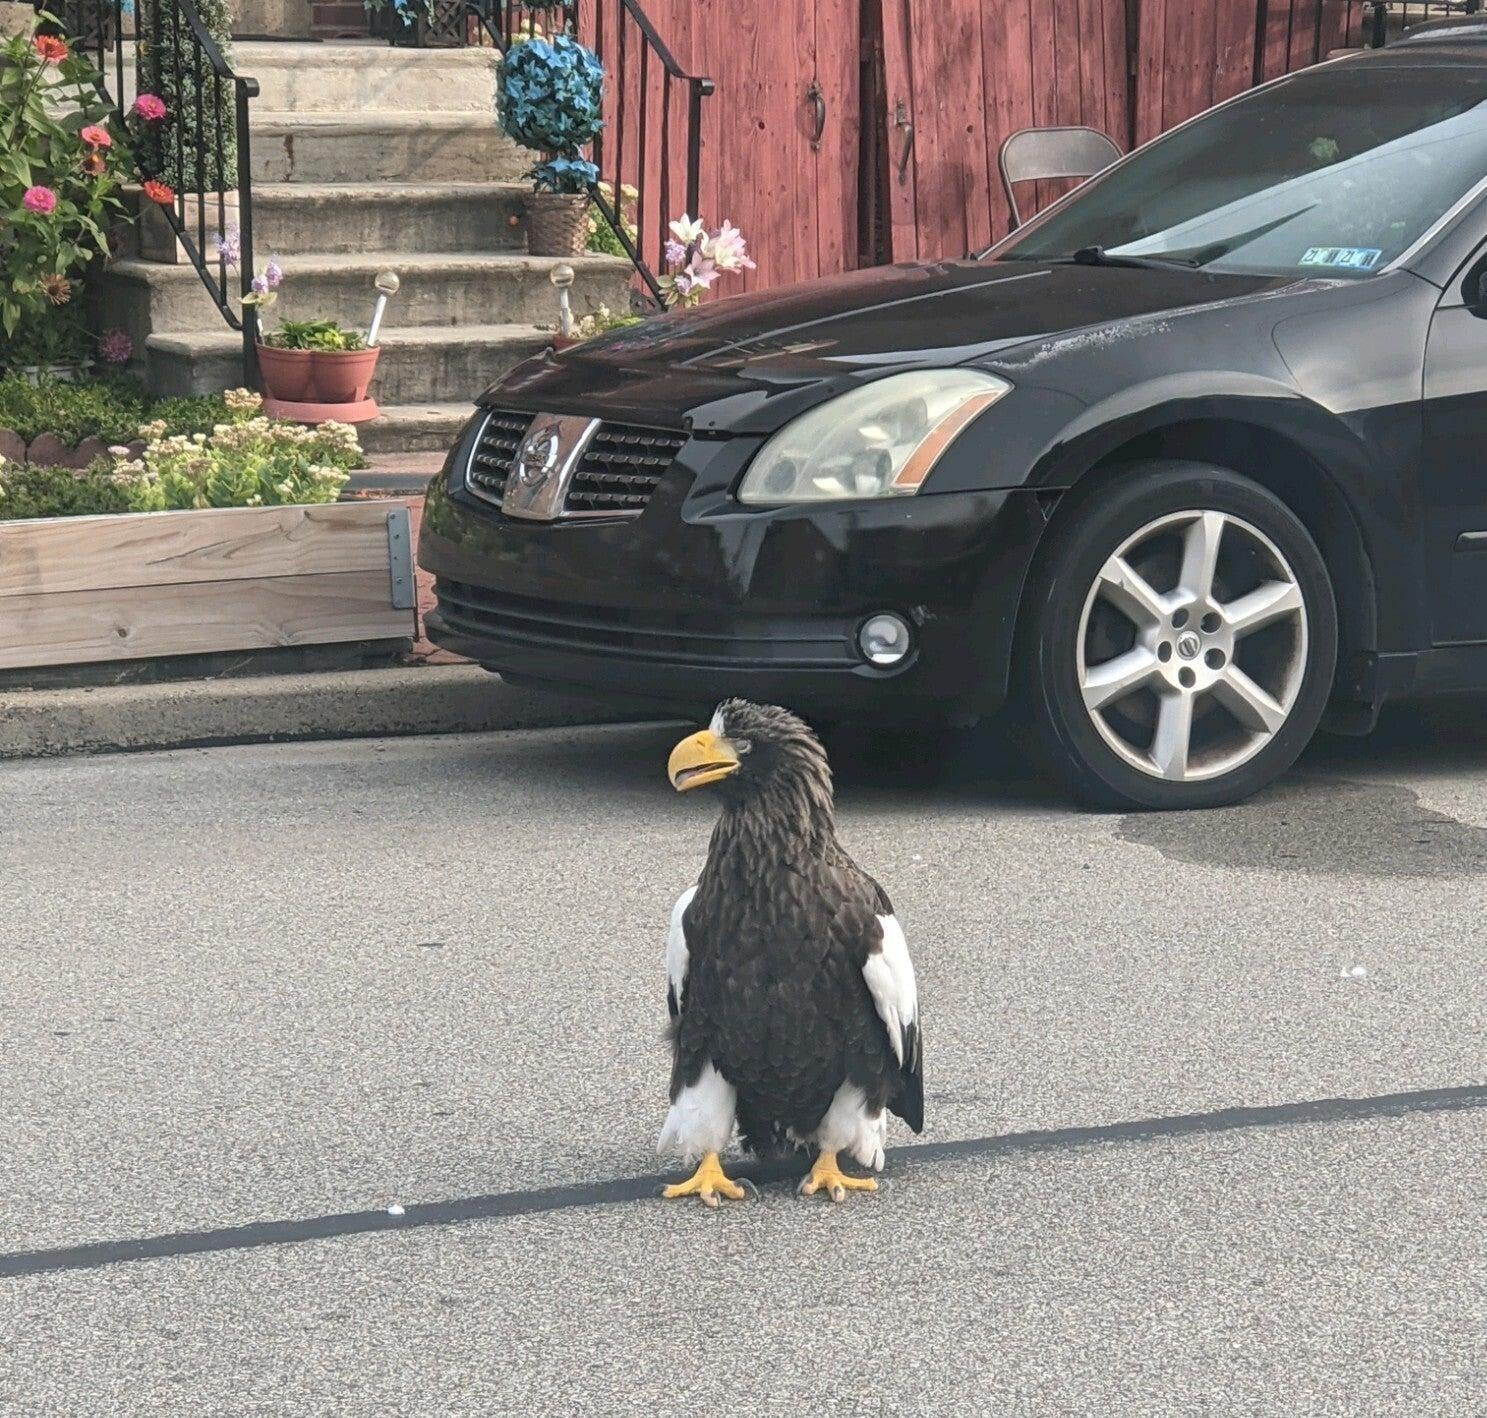 Why did the sea eagle cross the road? We may never know. (Photo: Jared Latchaw)